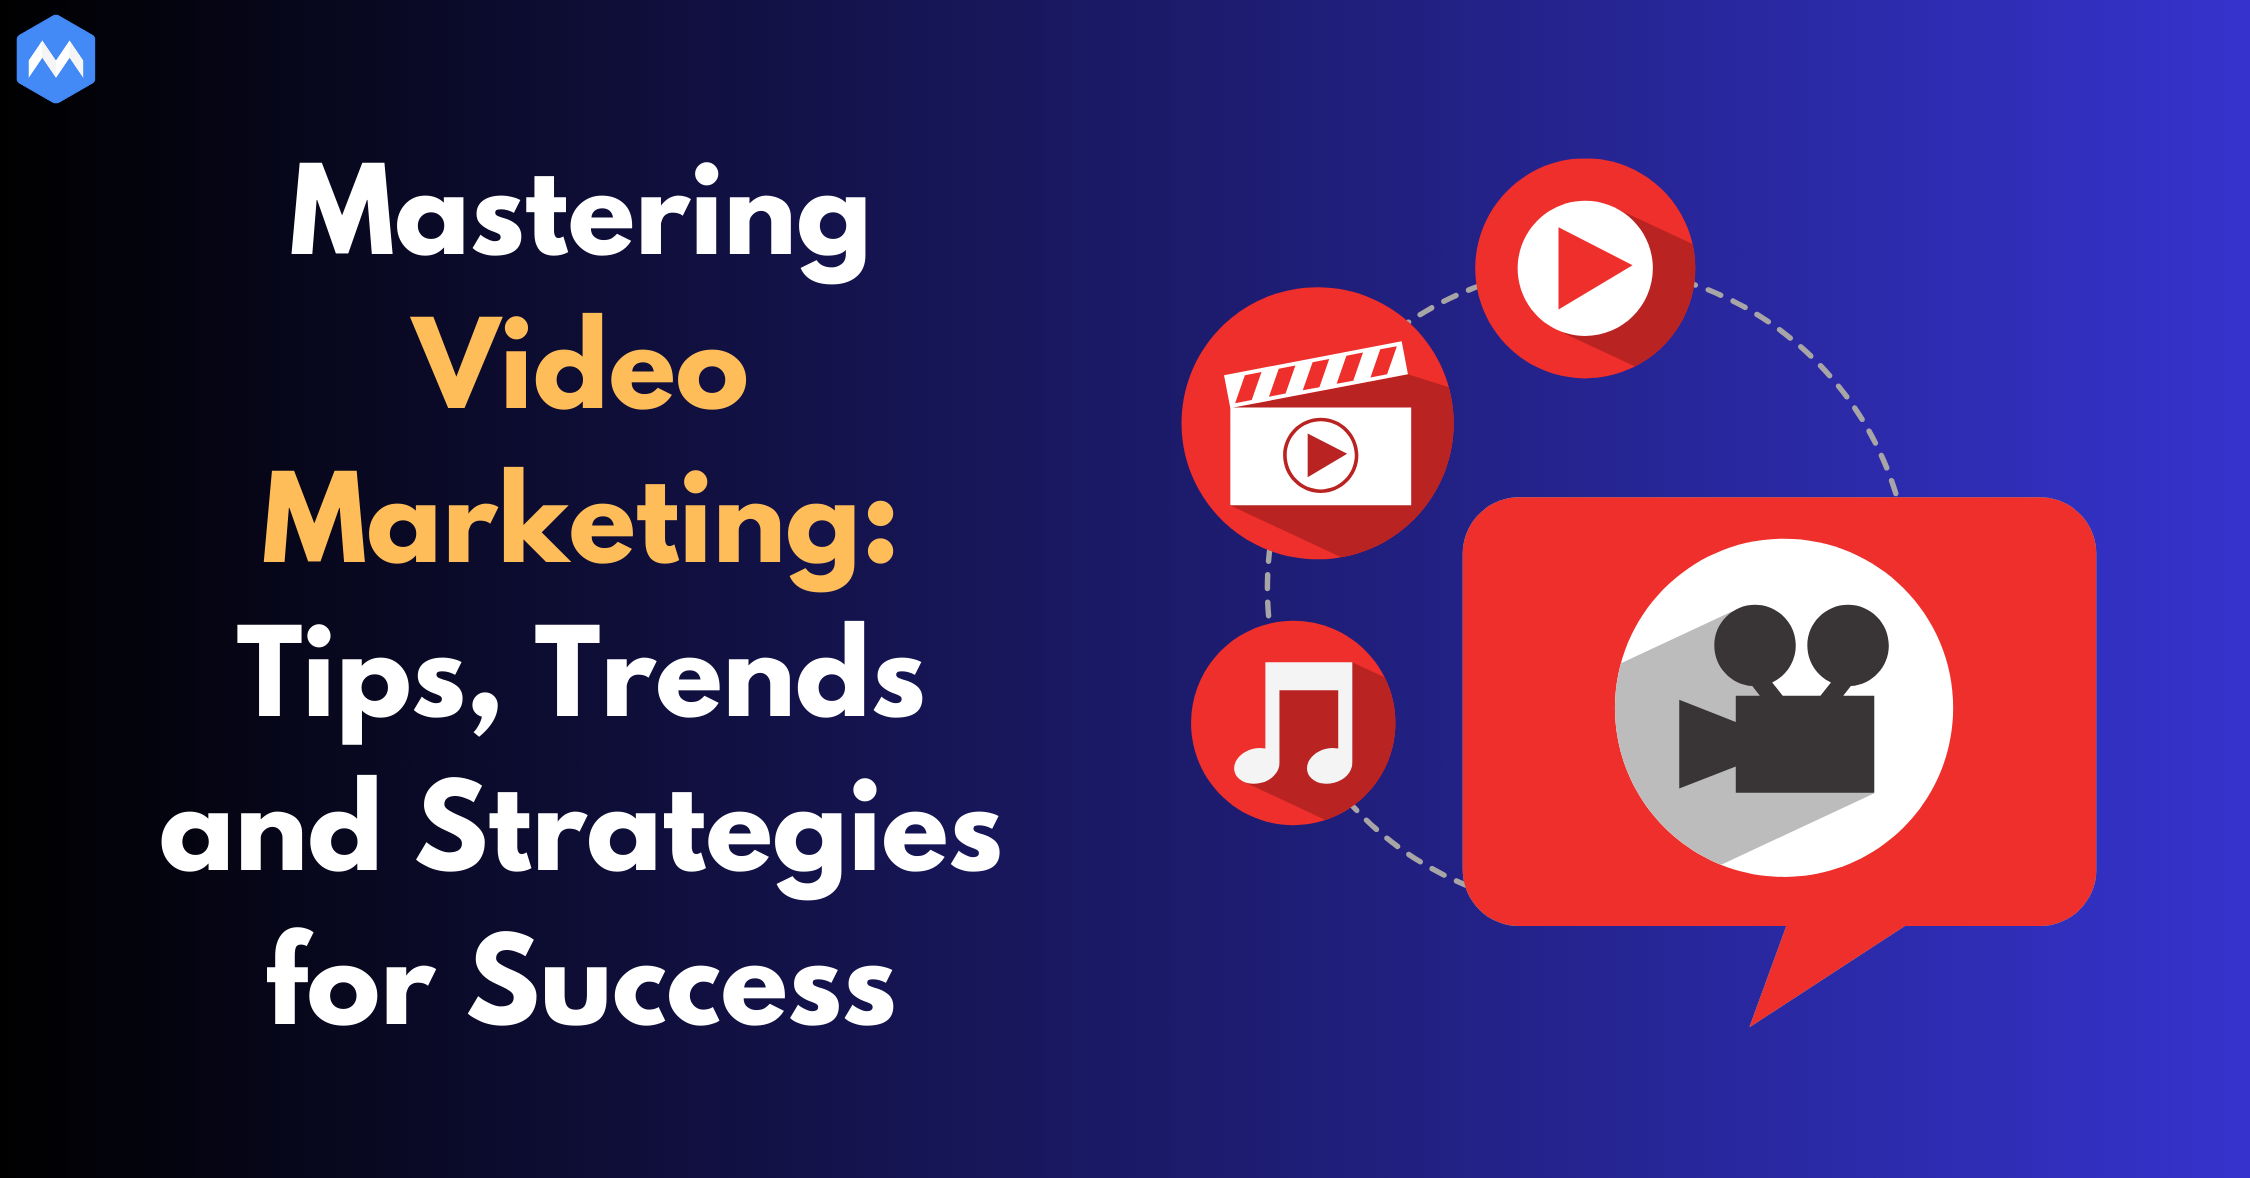 Mastering Video Marketing: Tips, Trends and Strategies for Success